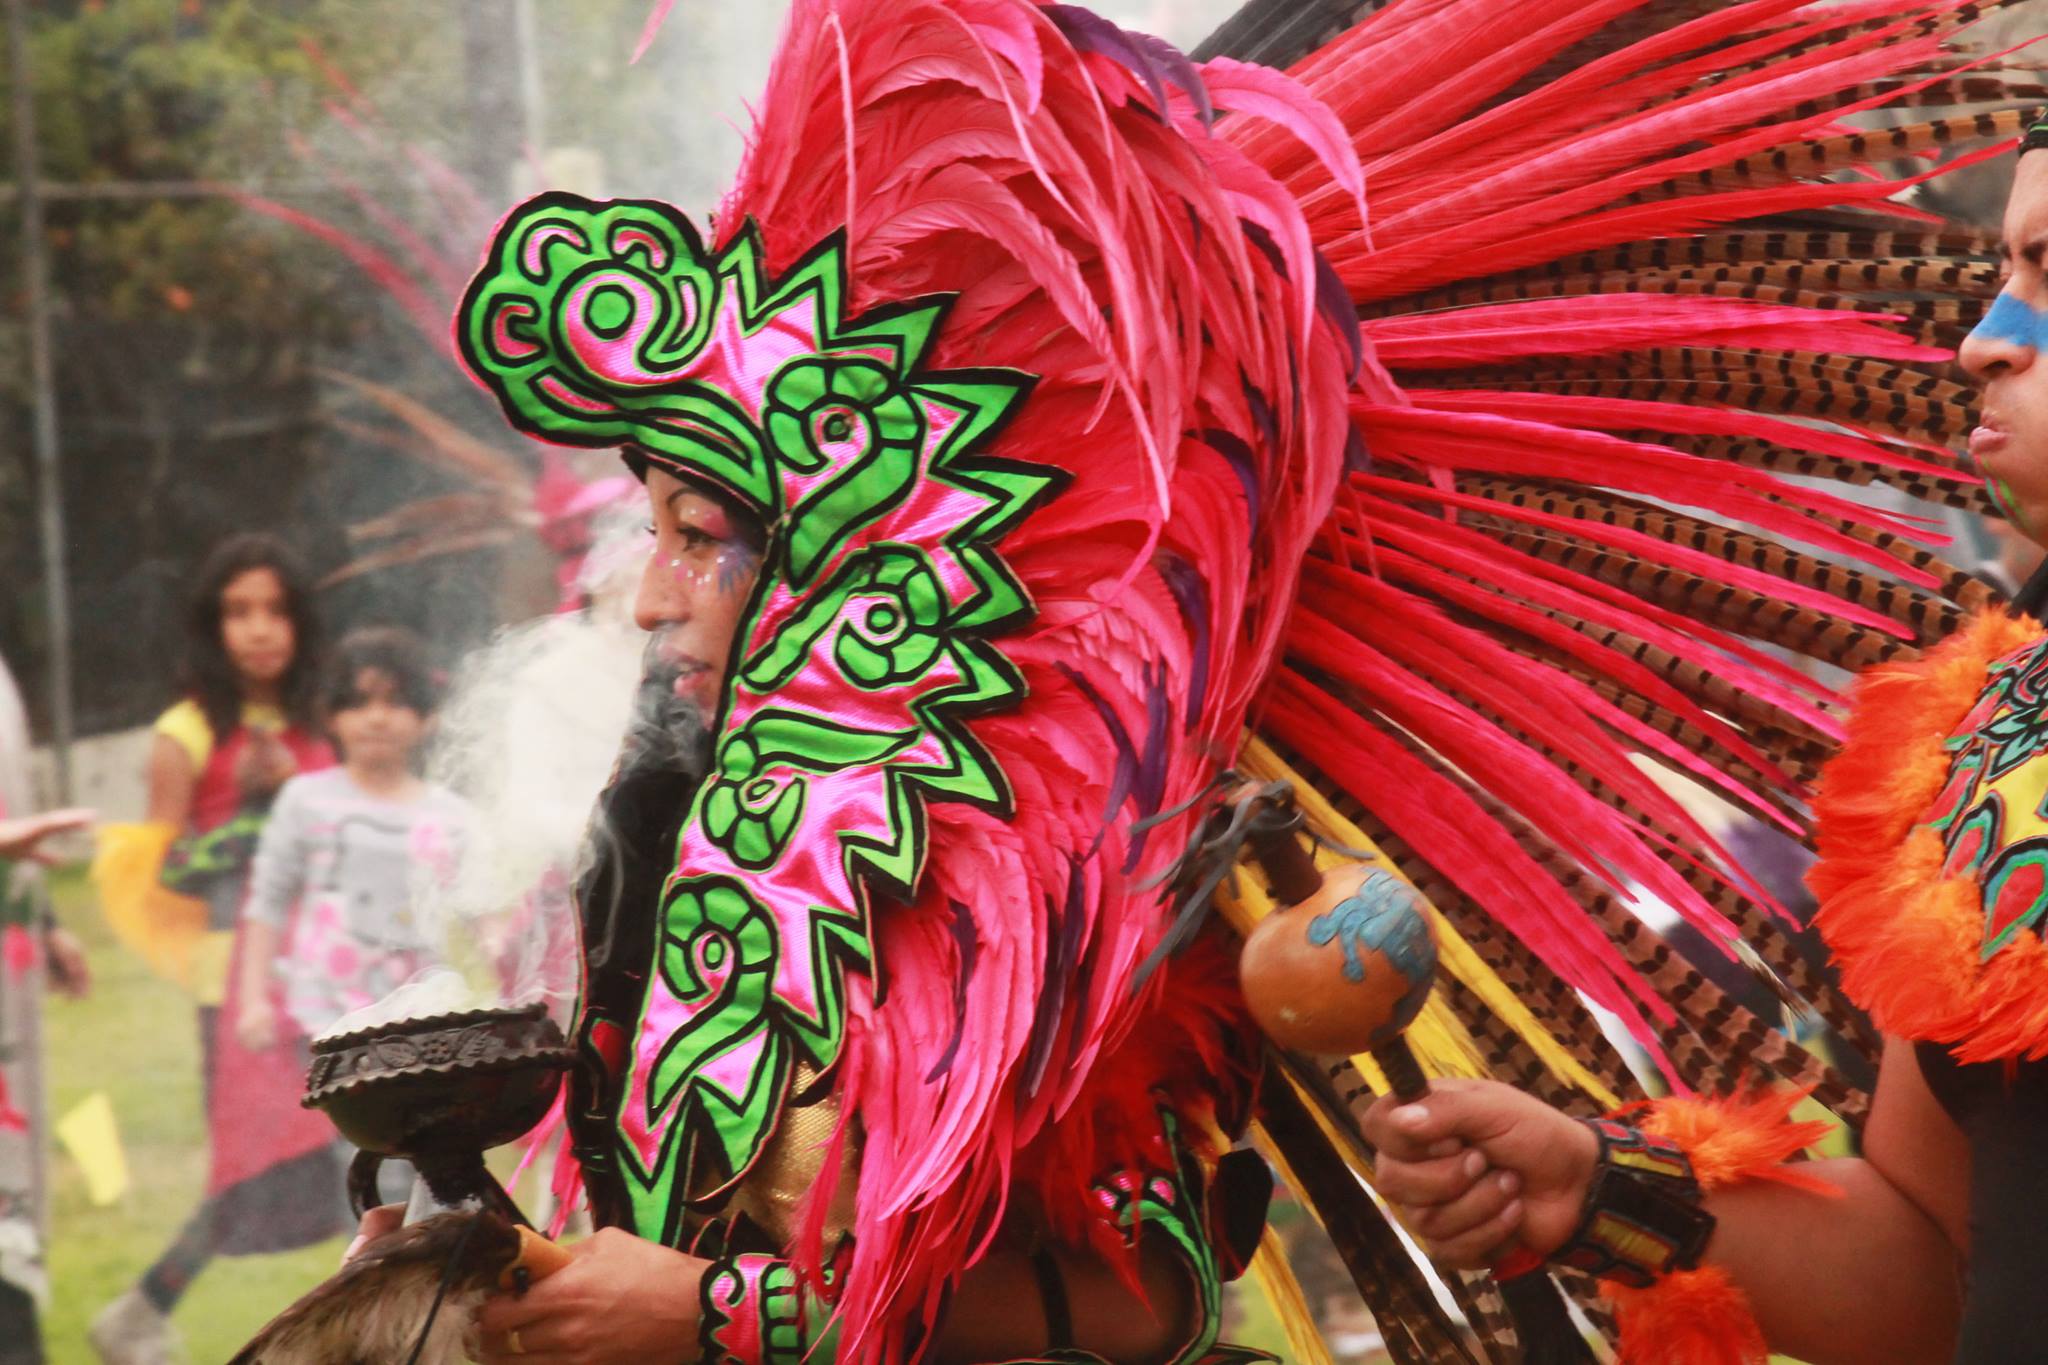 News from The Pierce - Azteca Mexica New Year in San Jose: MARCH 11-12